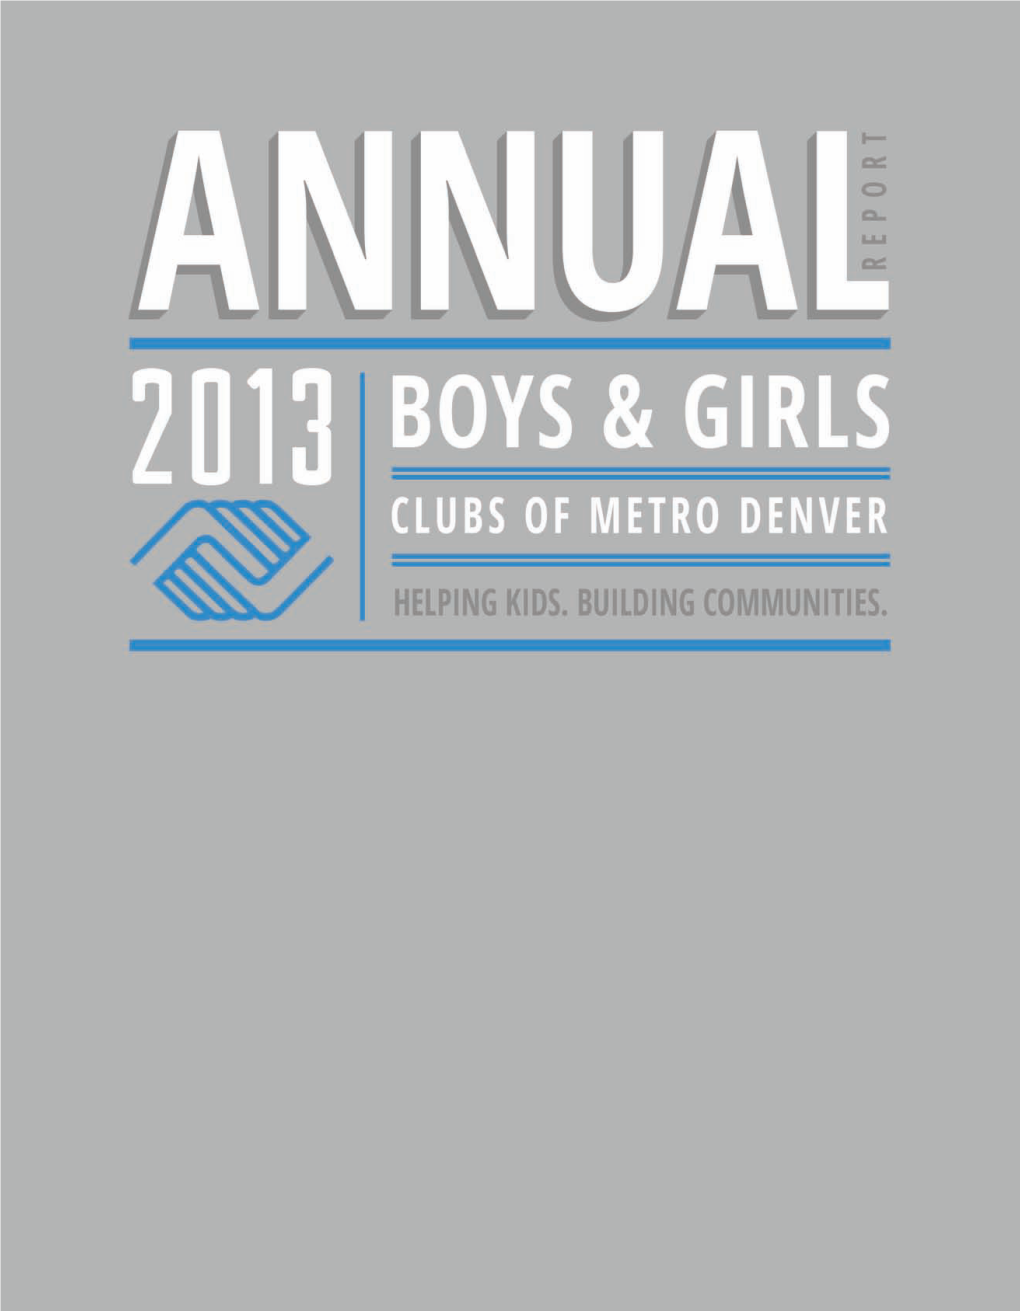 2013 Annual Report to the Community Boys & Girls Clubs of Metro Denver